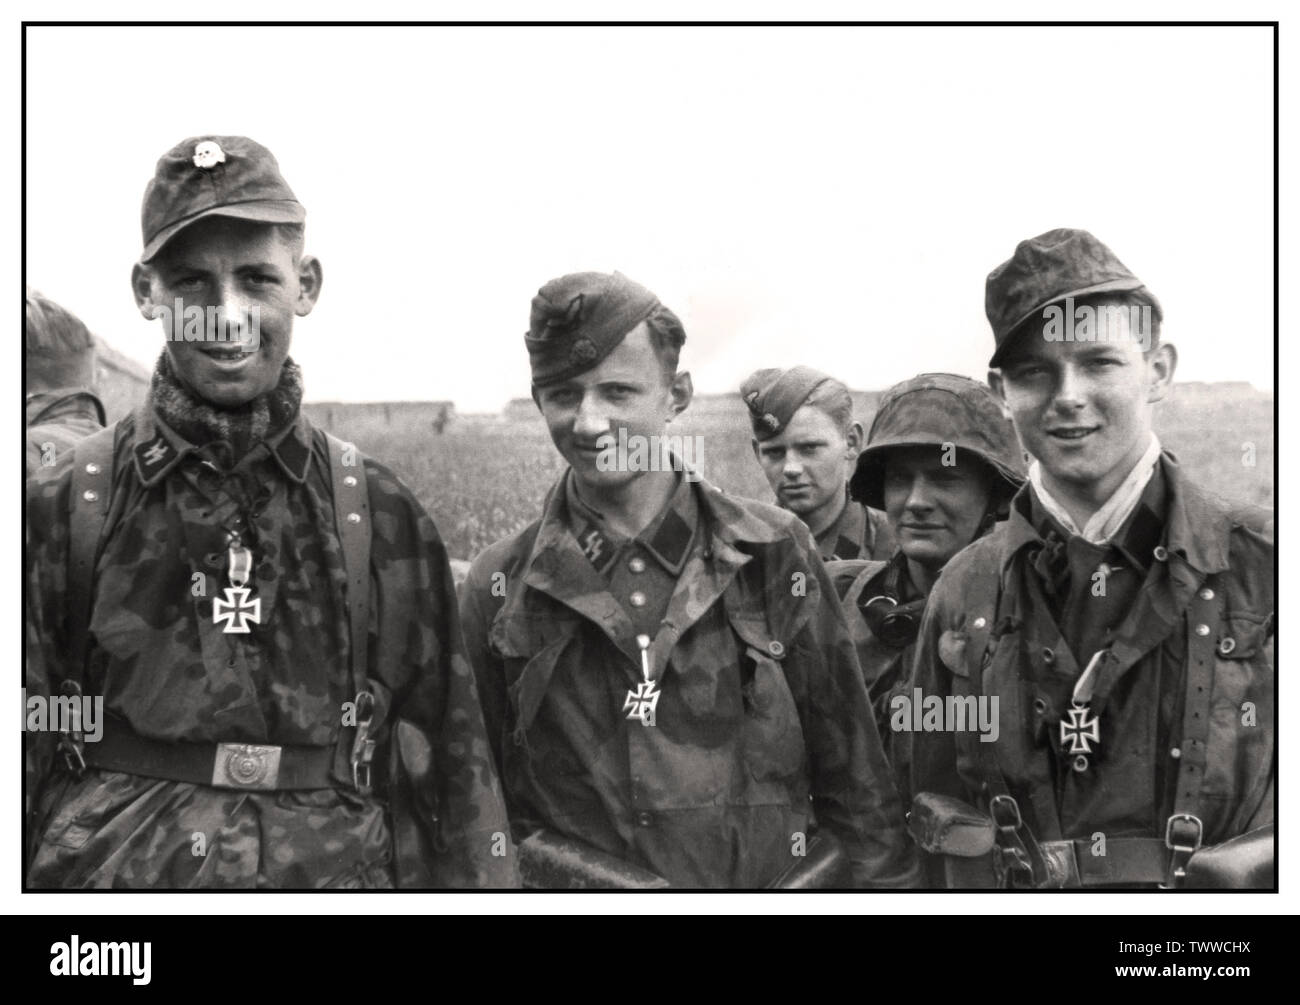 WW2 WAFFEN SS IRON CROSS MEDALS Nazi Propaganda image of young German Waffen SS men displaying newly awarded Iron Cross Medals in the field On the invasion front near Caen Three young men of the Waffen-SS after the award of the Iron Cross II 1944 Caen France Stock Photo